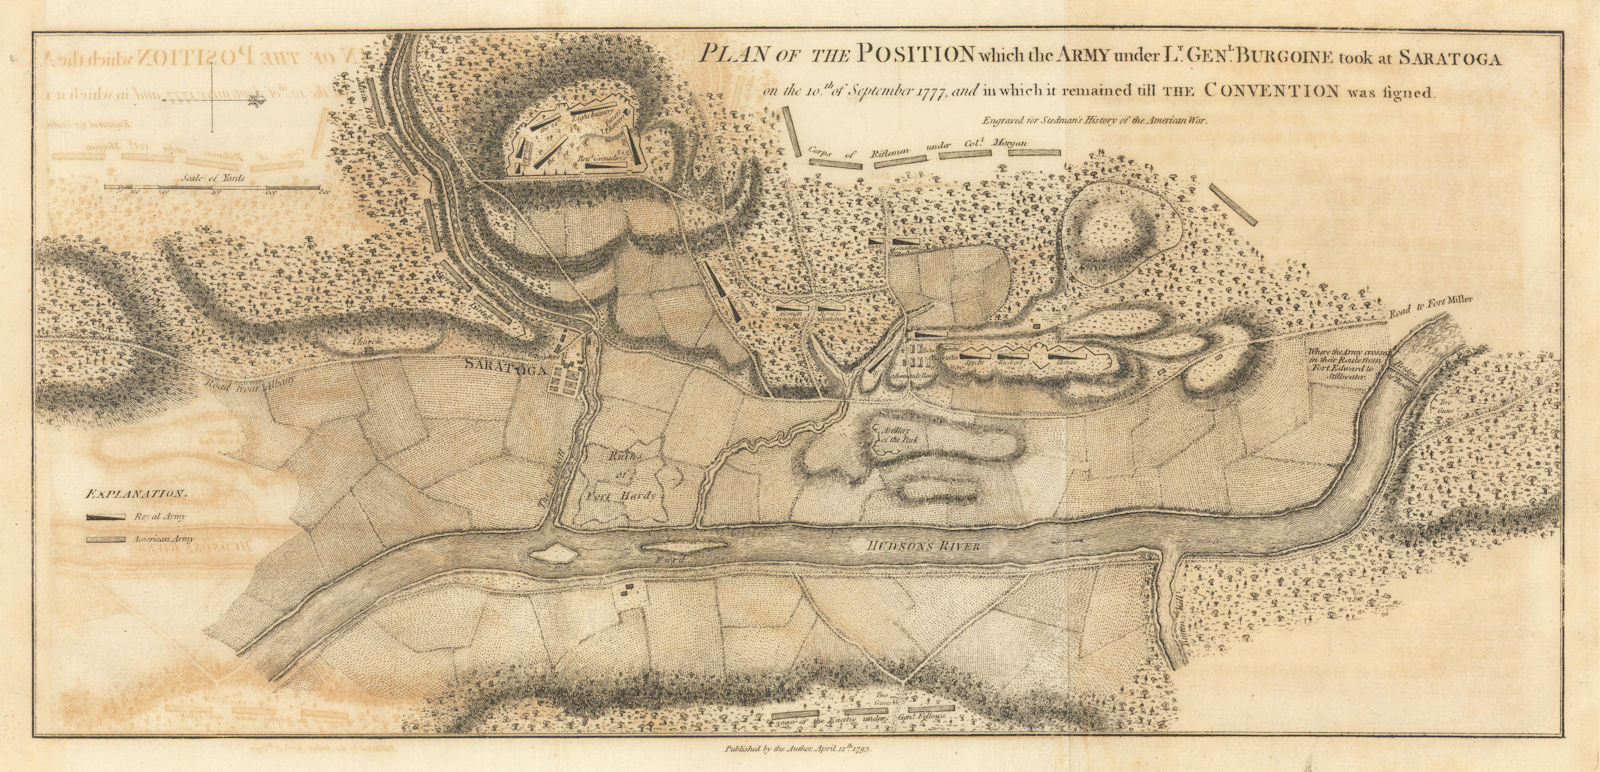 Plan of the Position which the Army… took at Saratoga. FADEN/STEDMAN 1794 map